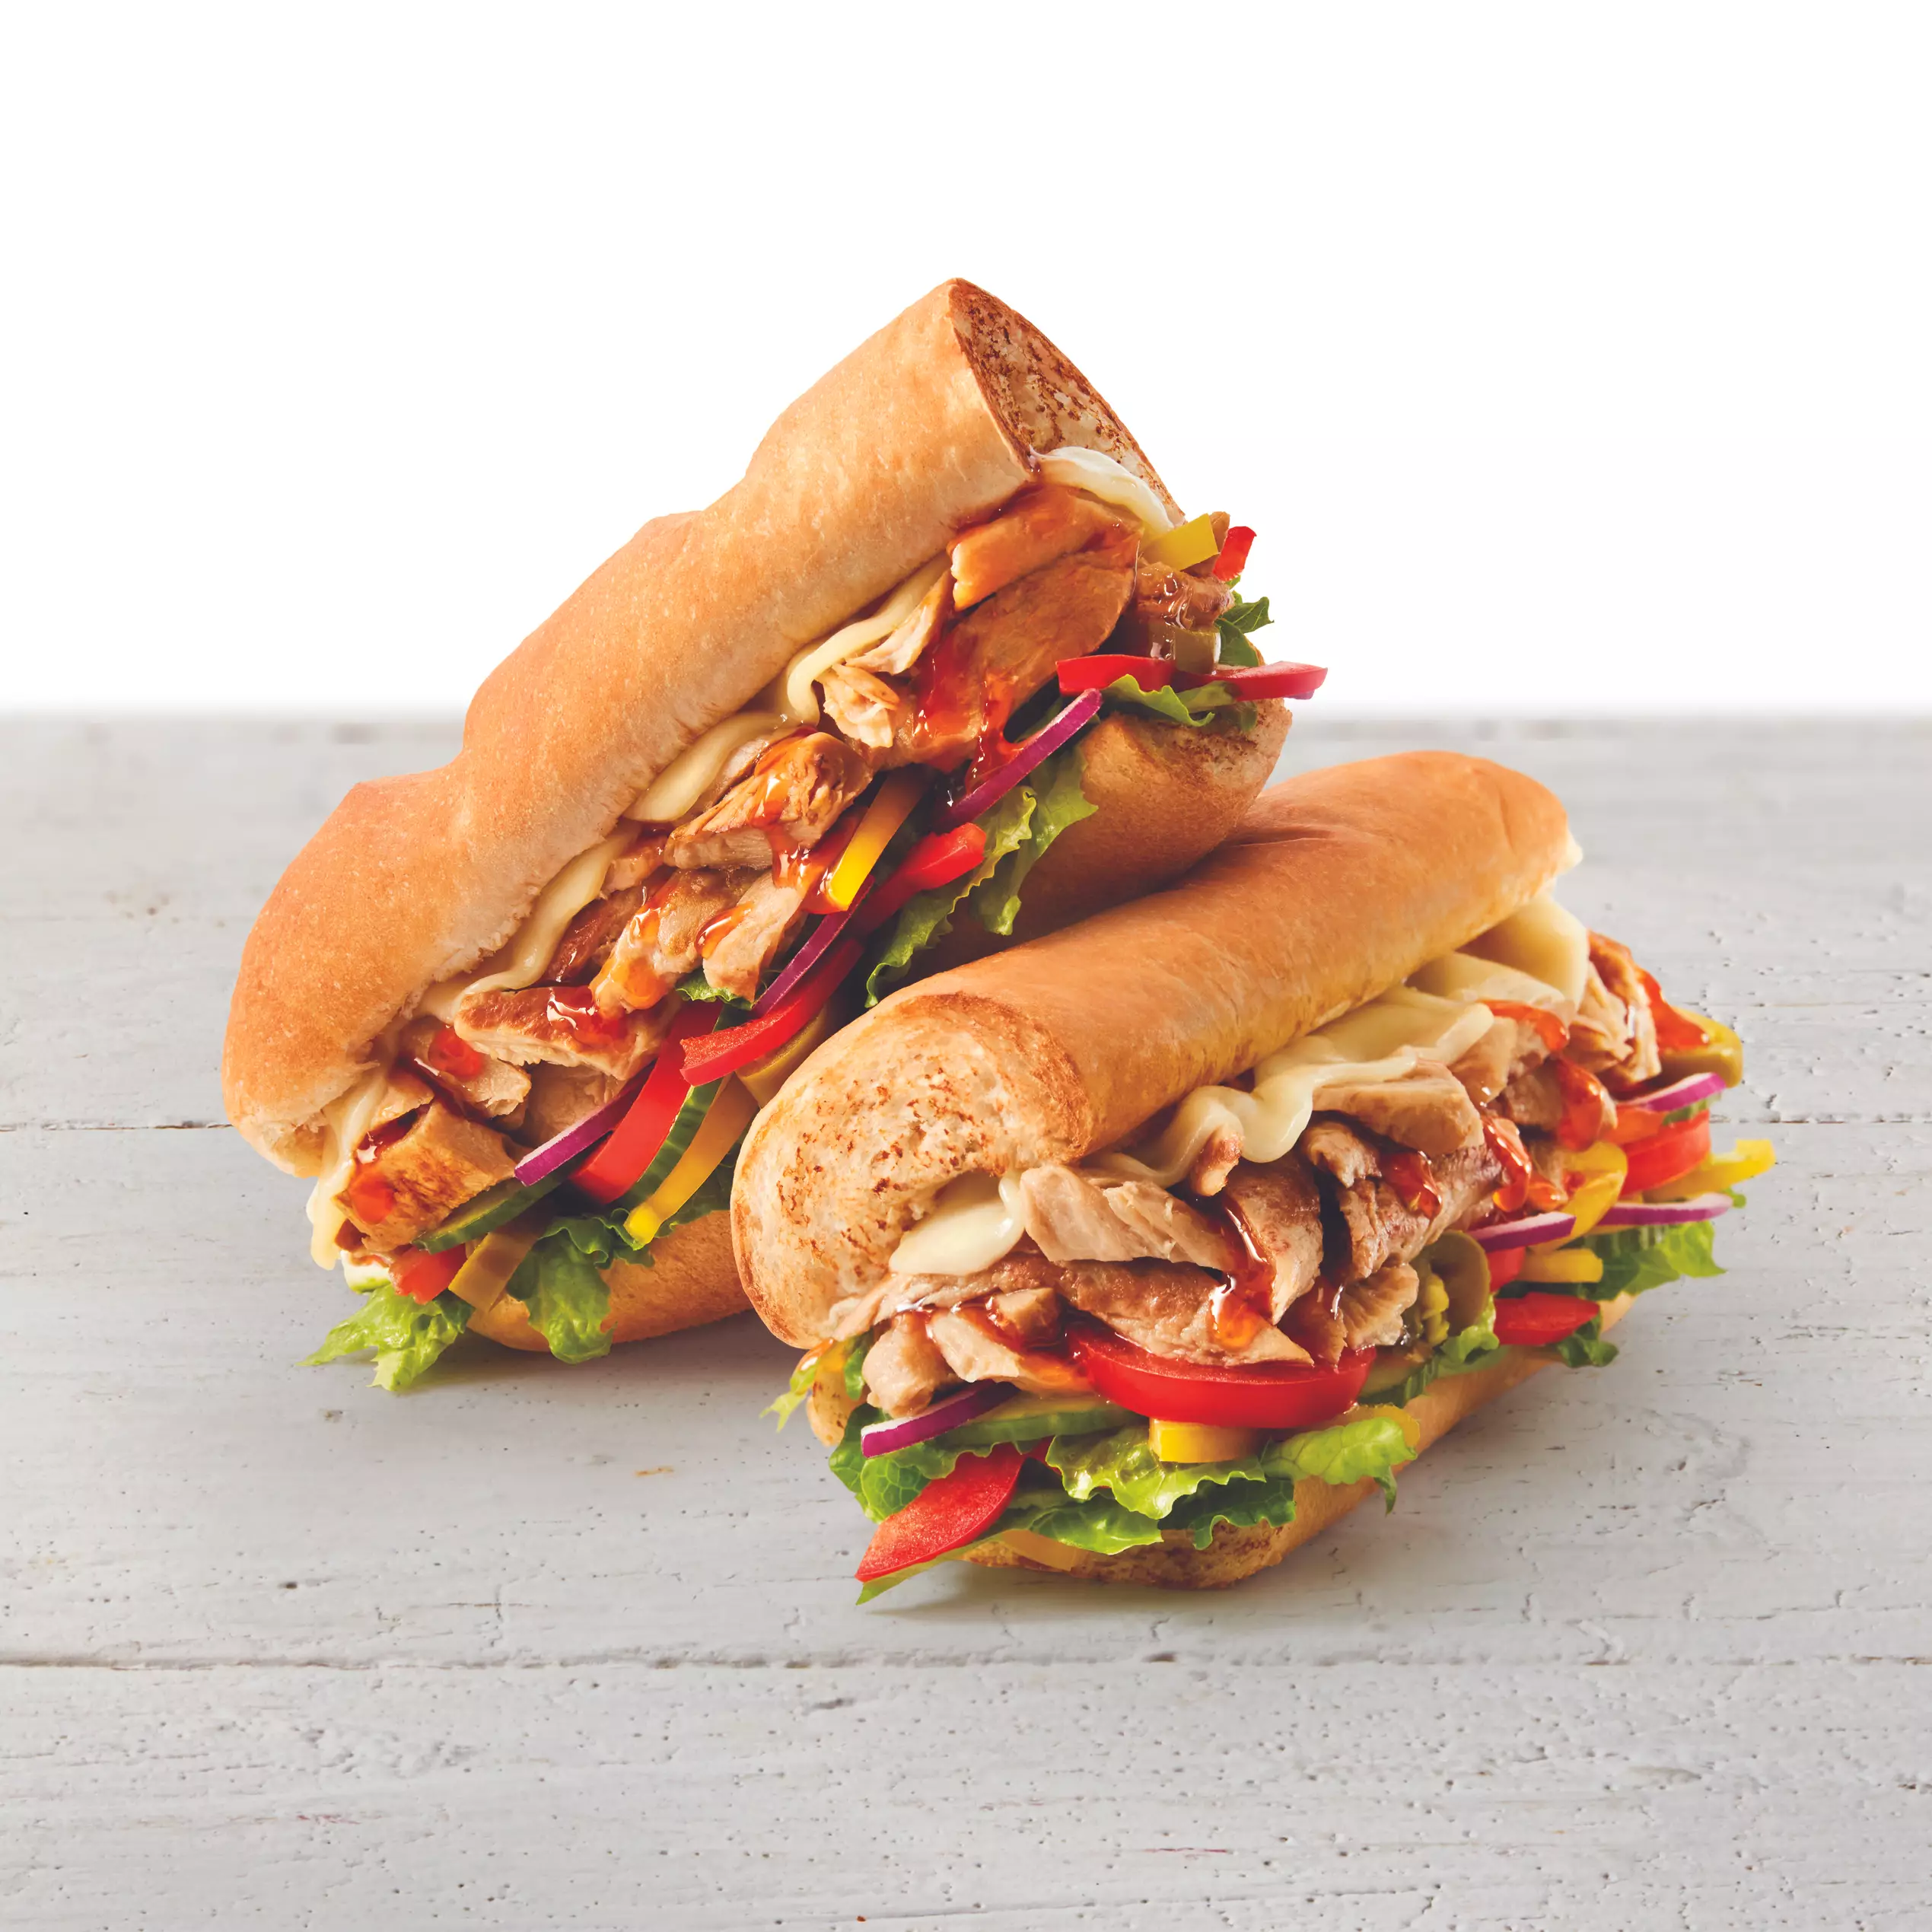 The TLC is available as a 6-inch or Footlong Sub, a salad or a wrap for even more choice (